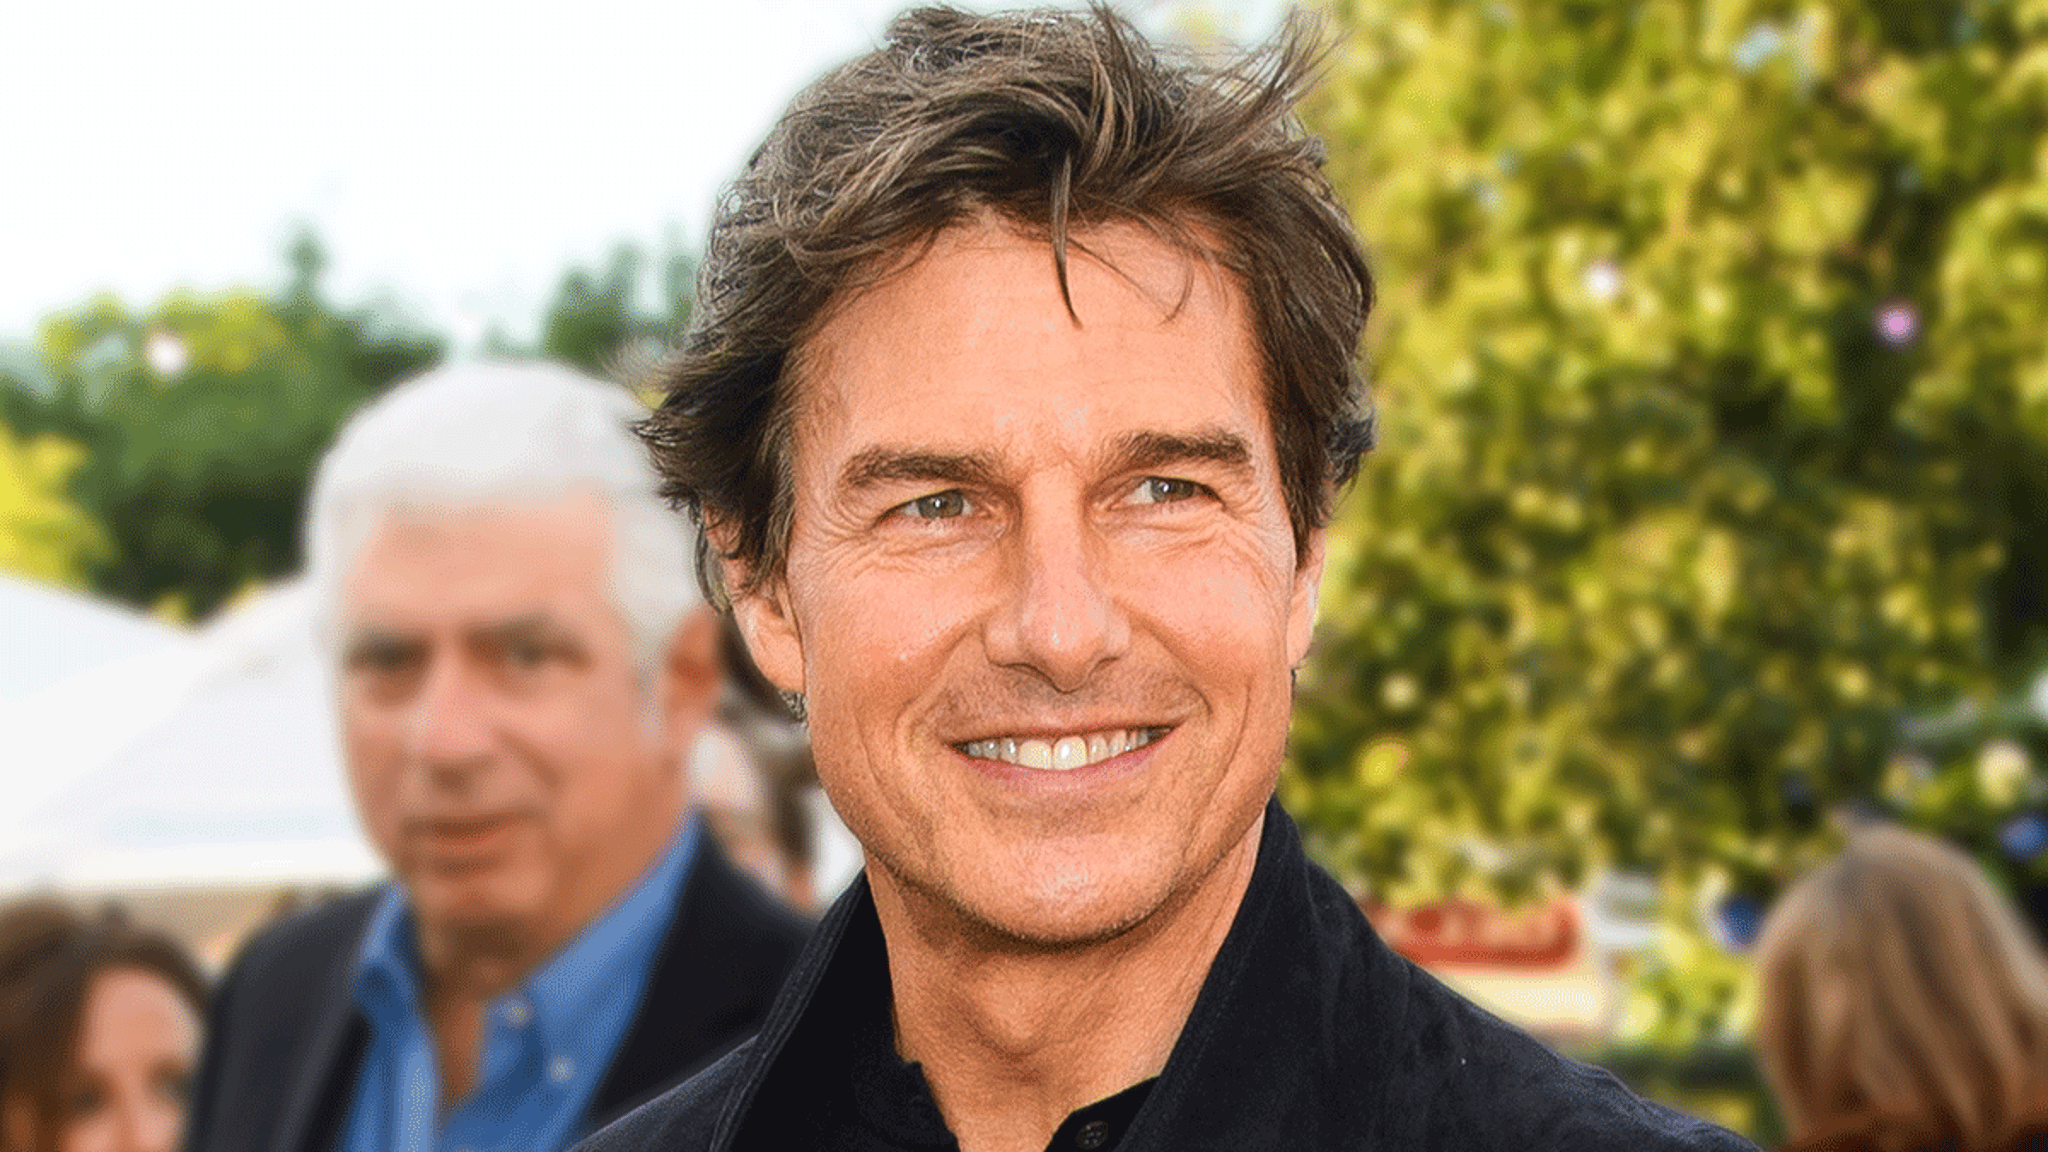 Tom Cruise Freefalls Out of Airplane in New ‘Mission: Impossible’ Promo